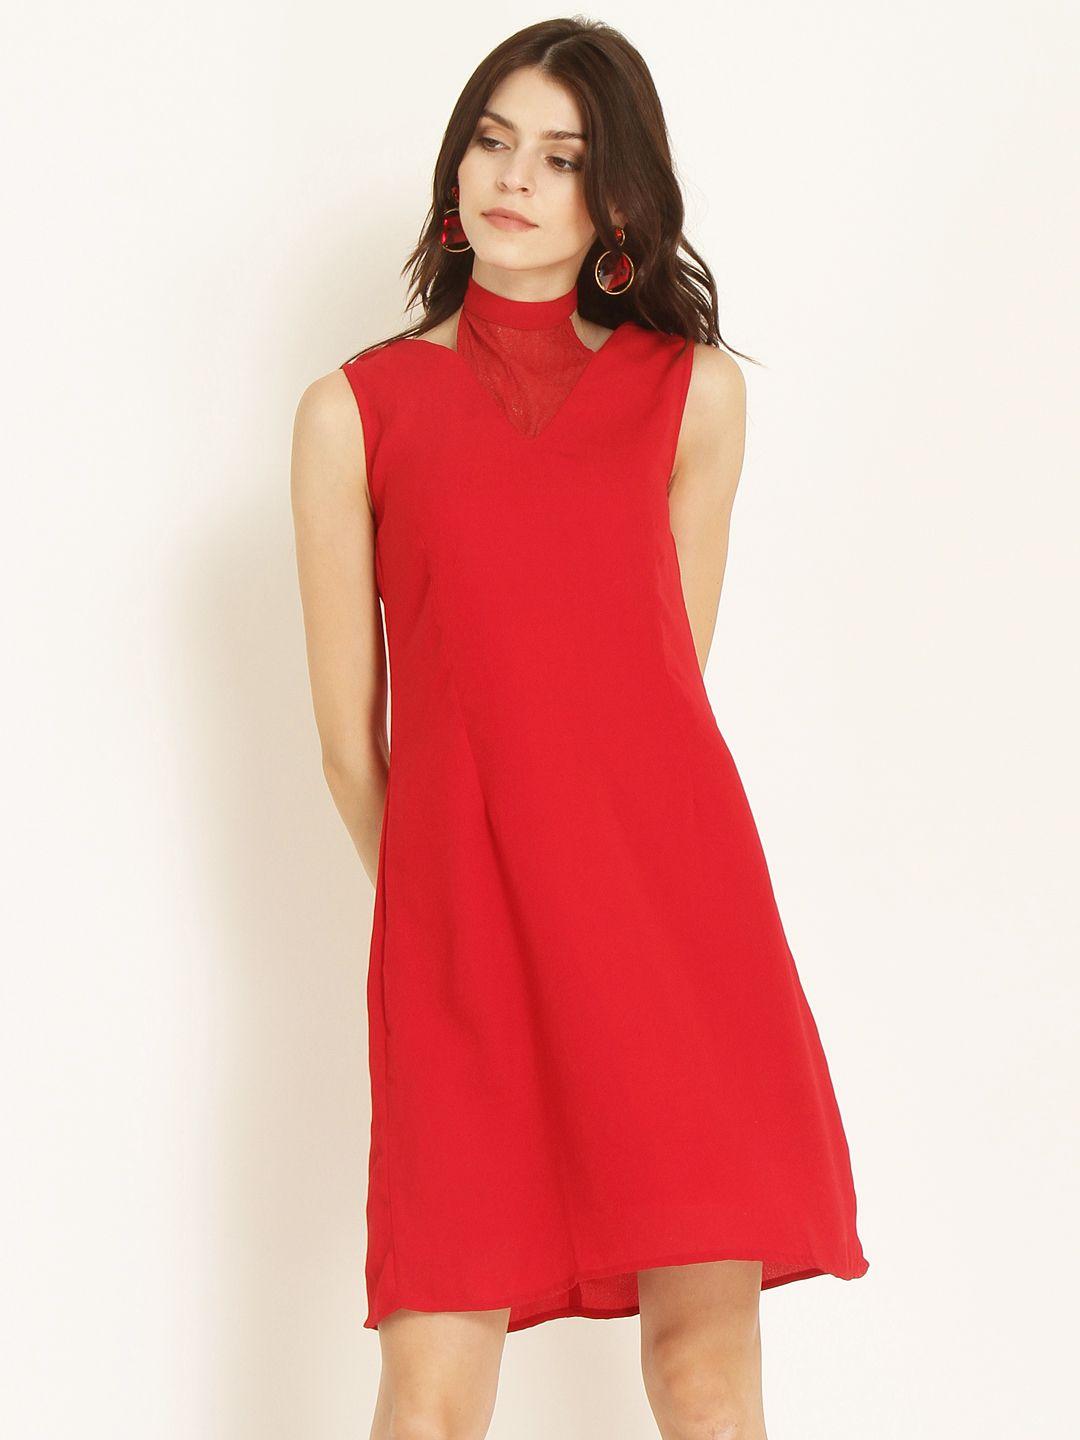 marie-claire-women-red-solid-a-line-dress